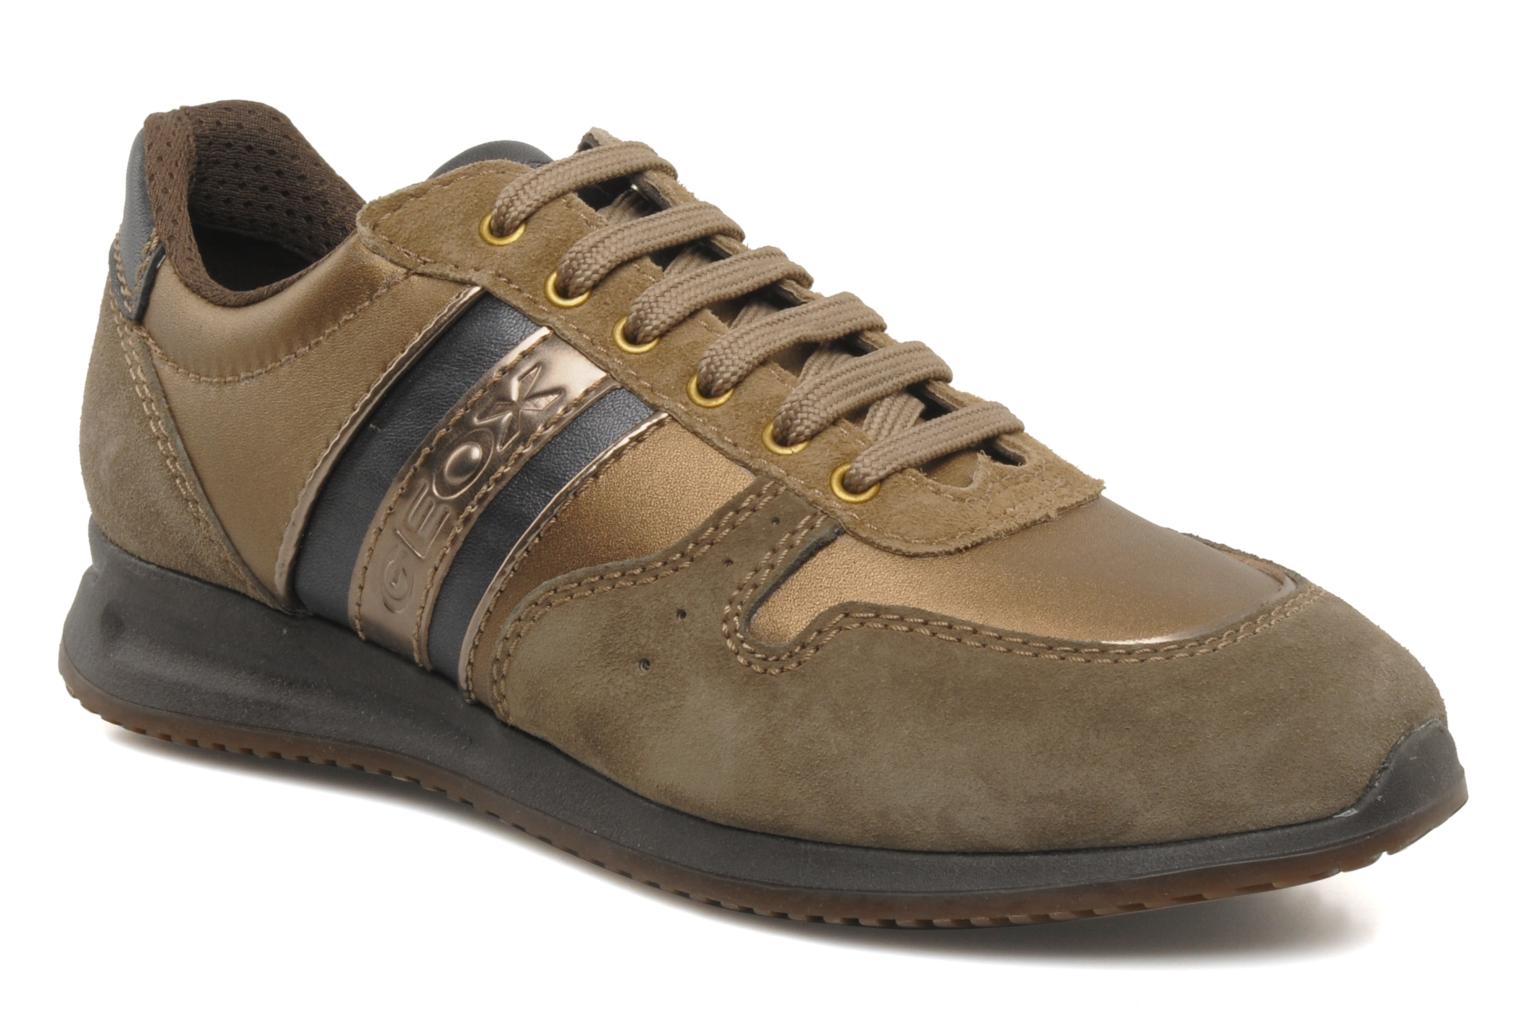 Geox D musa b Trainers in Brown at Sarenza.co.uk (94088)